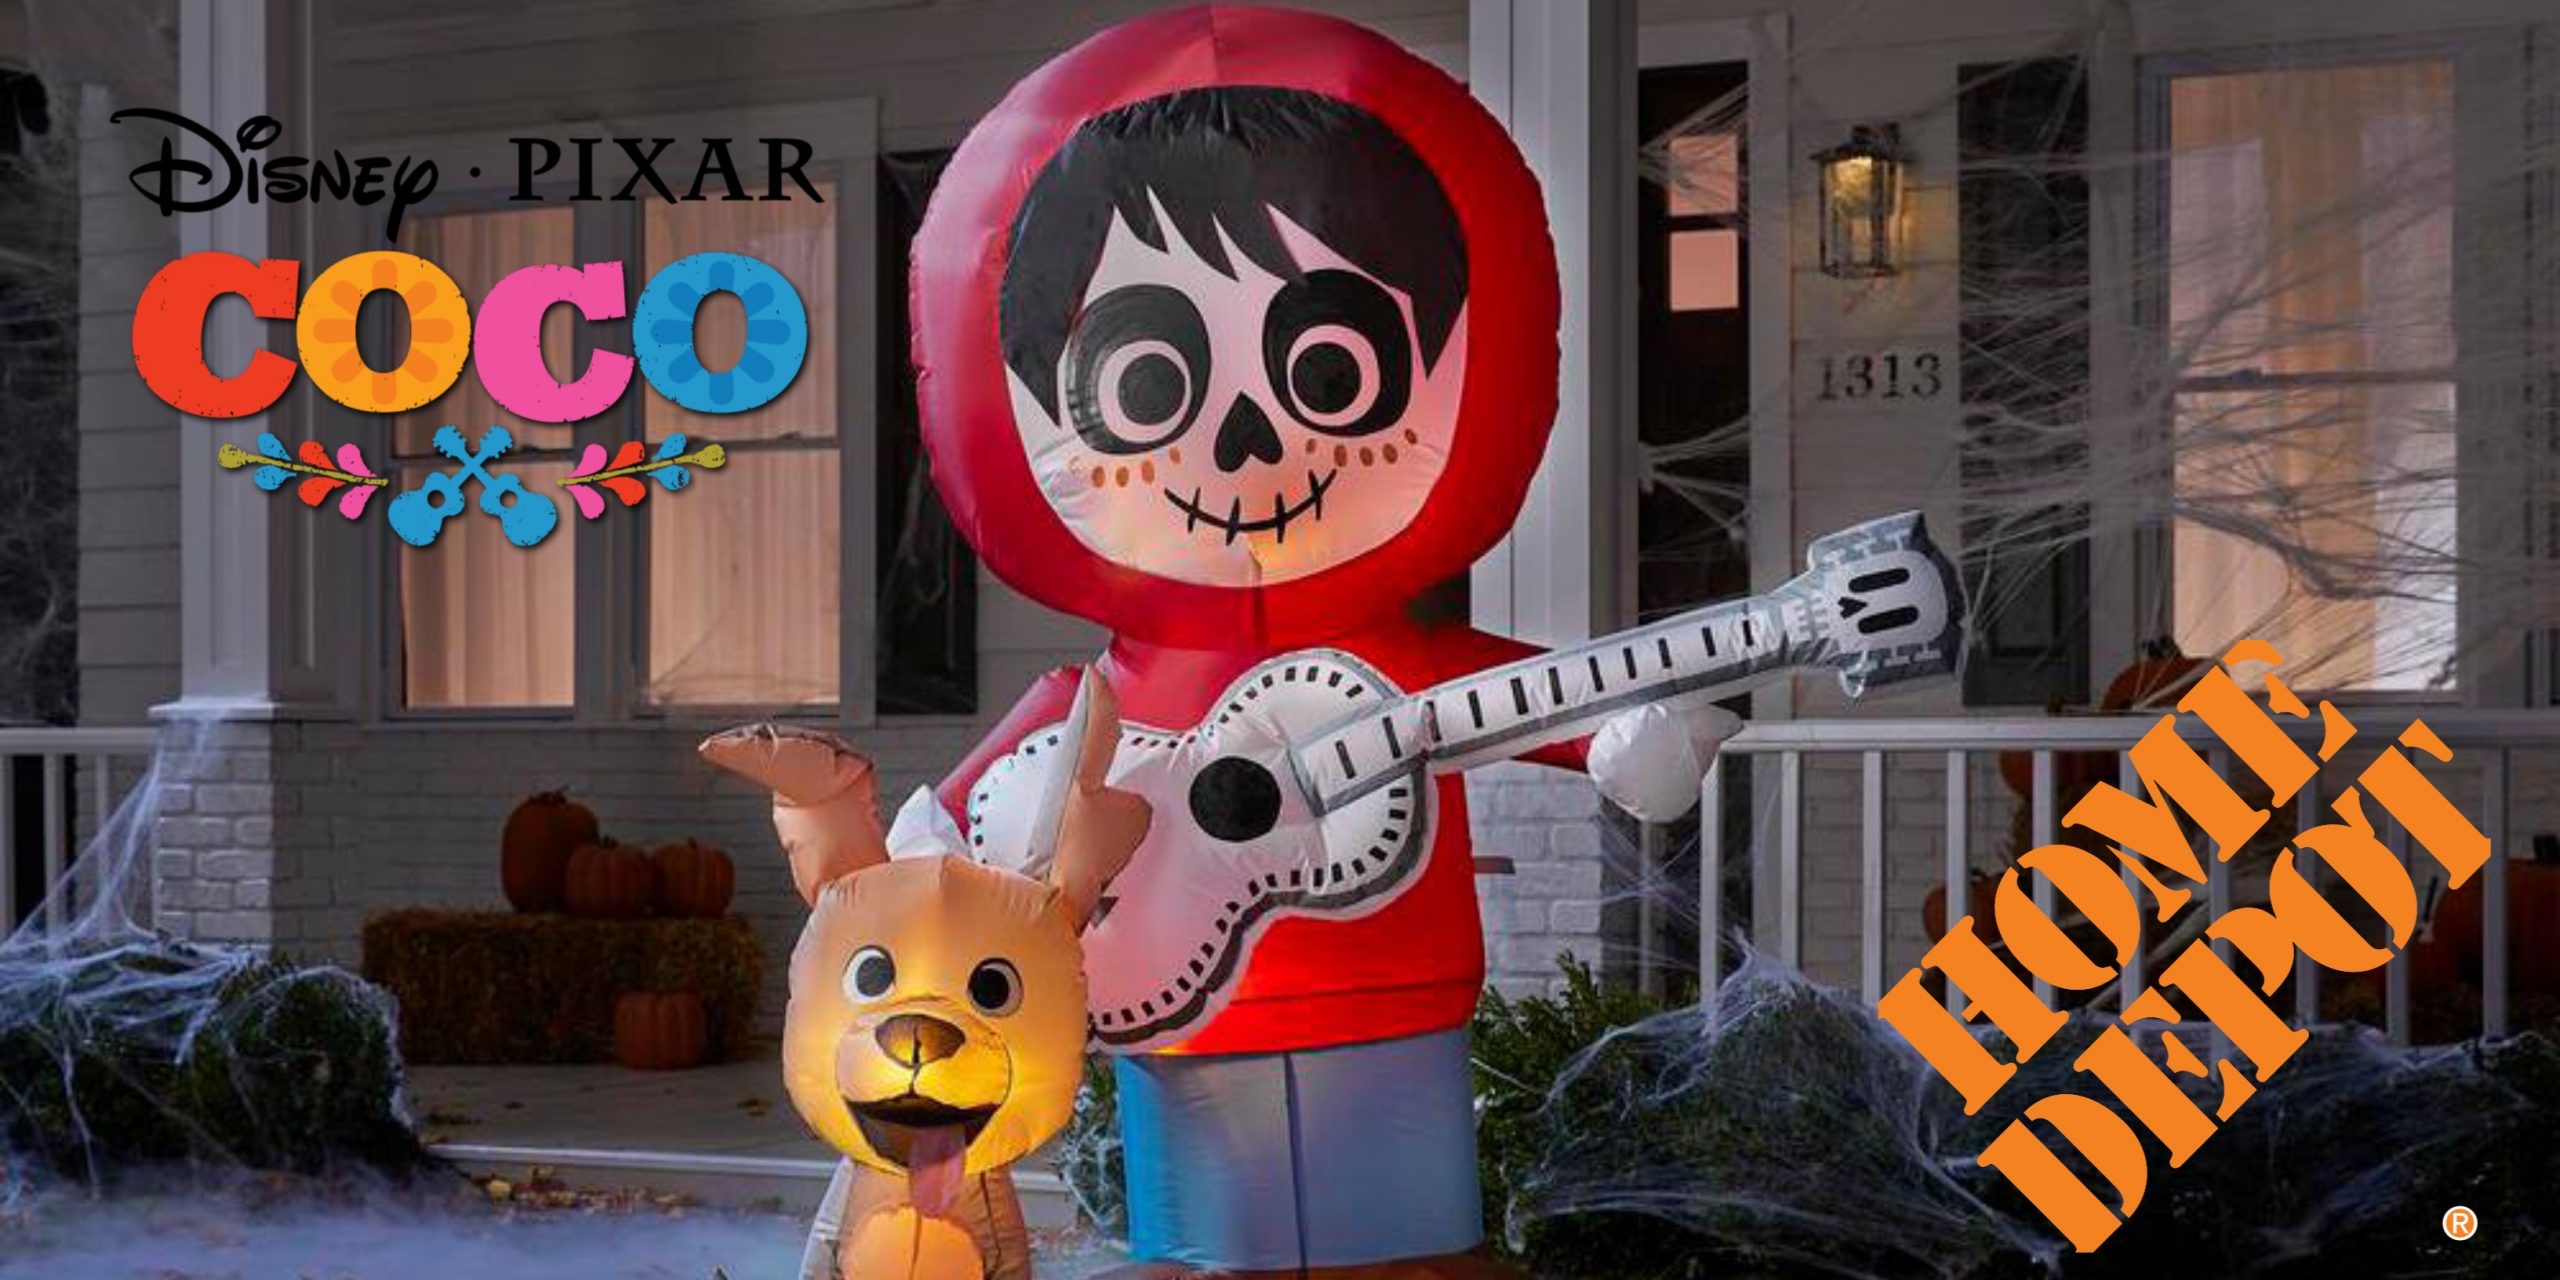 ‘Coco’ Themed Inflatable Now Available at The Home Depot in Time for Halloween